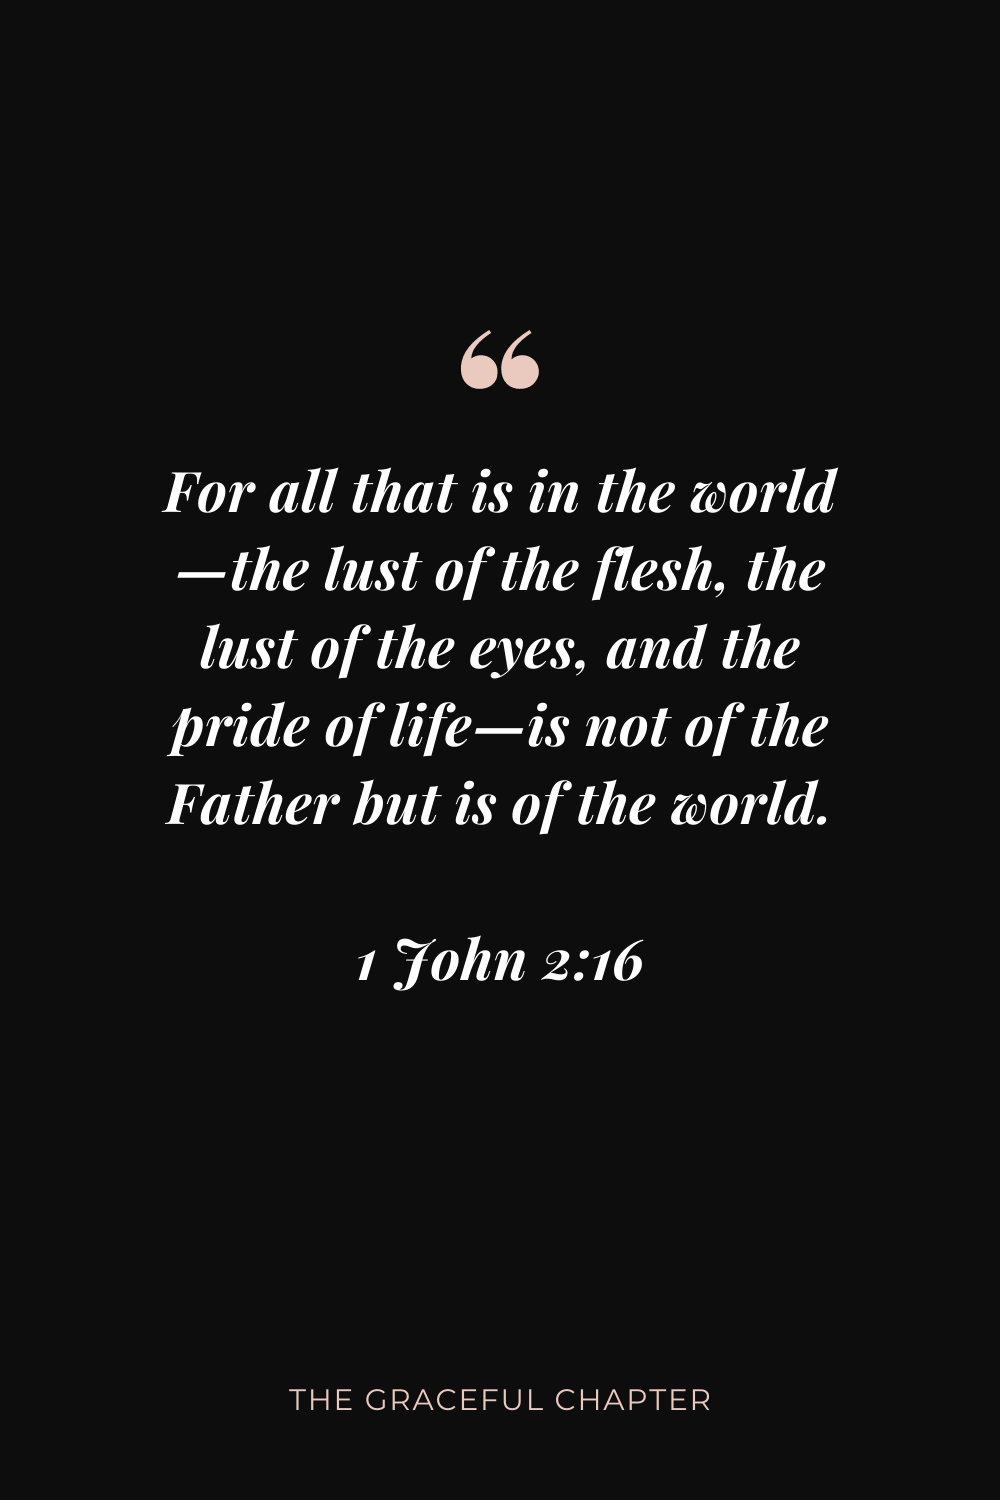 For all that is in the world—the lust of the flesh, the lust of the eyes, and the pride of life—is not of the Father but is of the world. 1 John 2:16